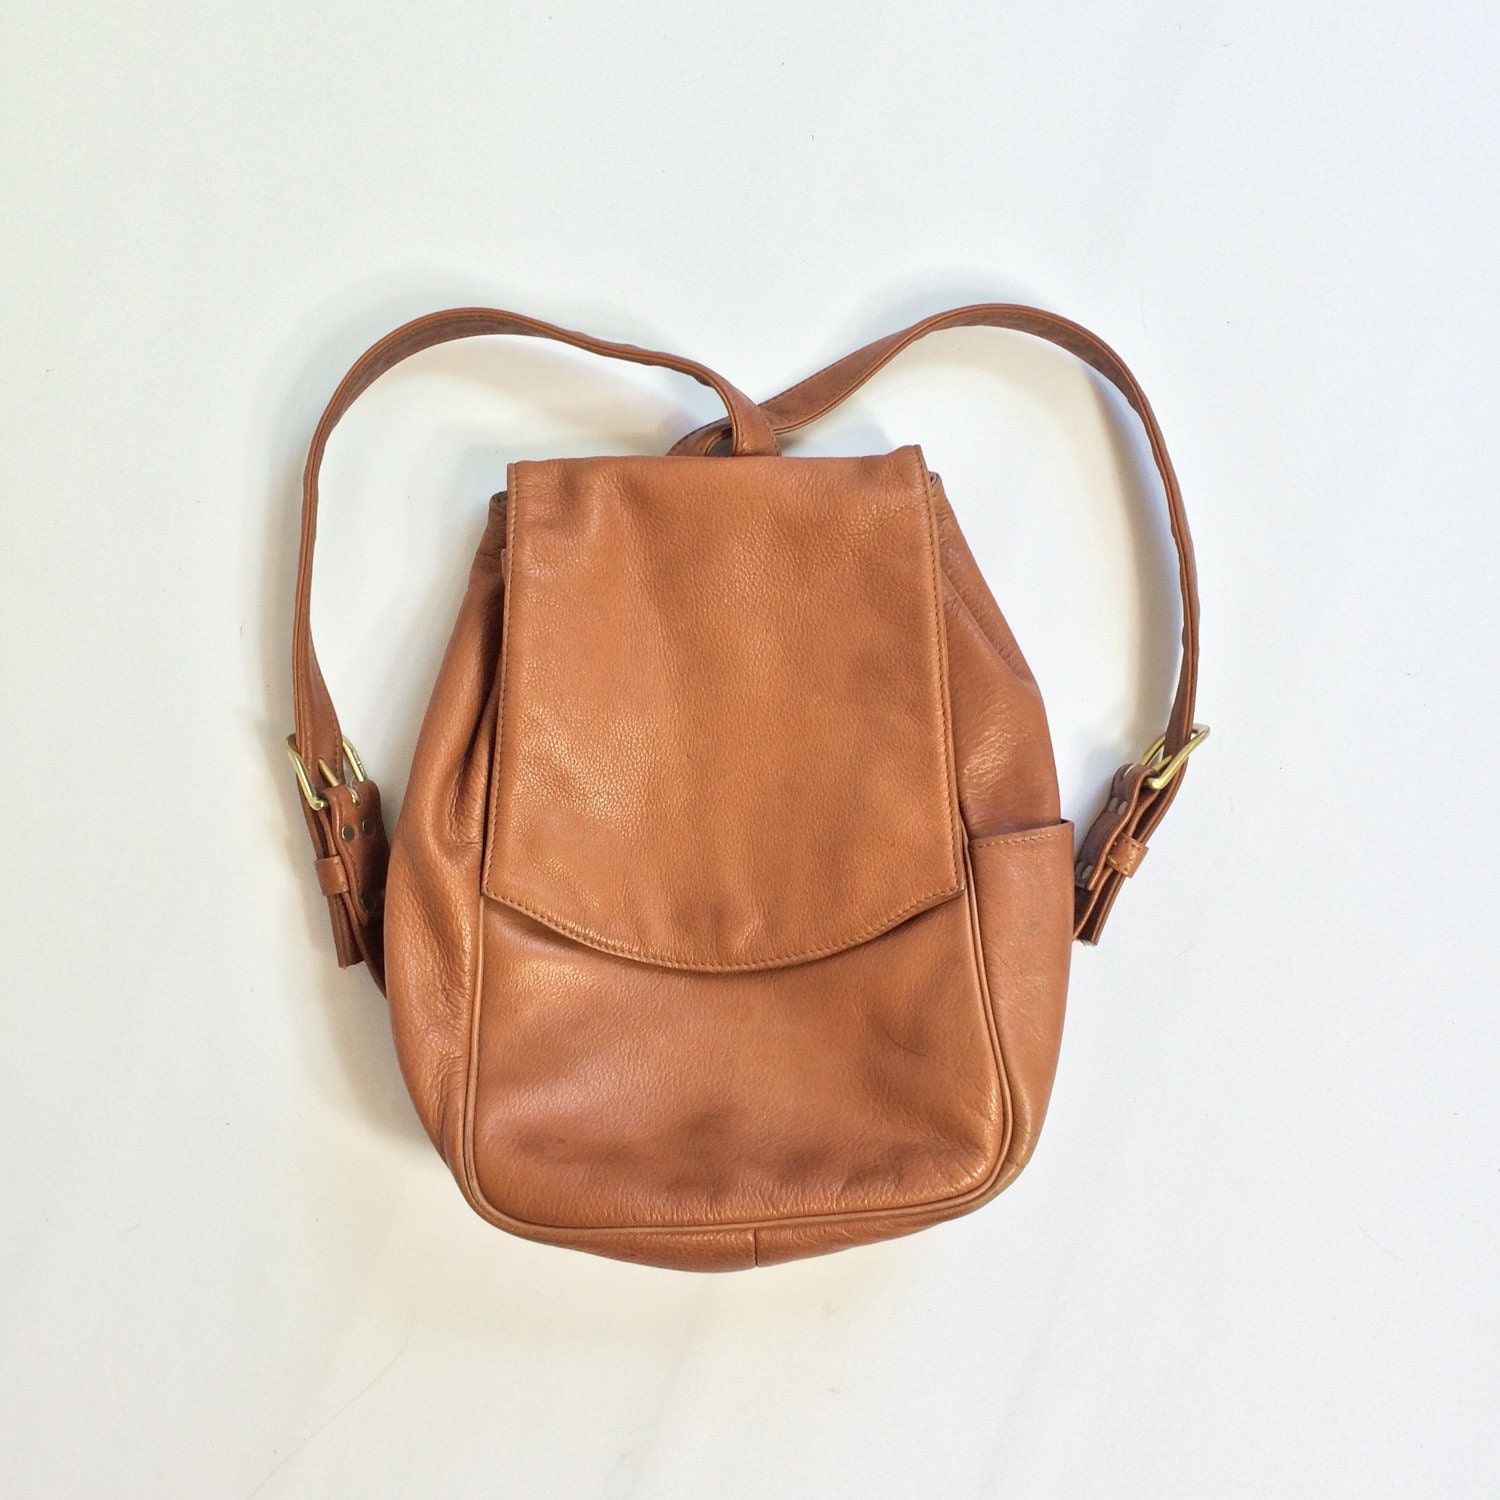 90s Tan Leather BACKPACK Purse Light Brown Leather Mini